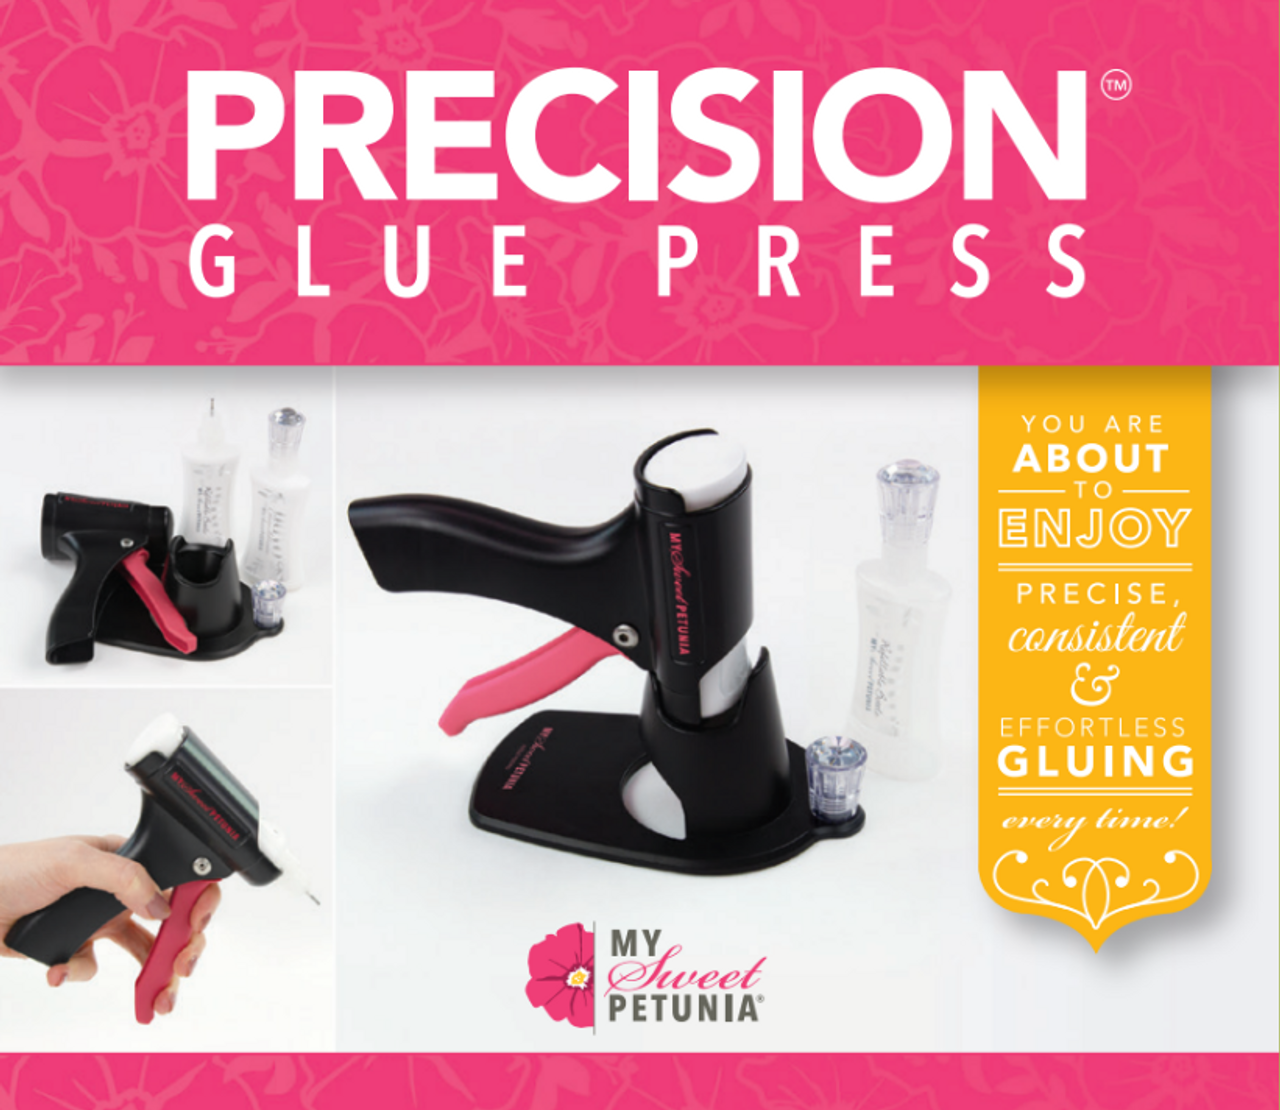 Precision Glue Press REVIEW! Game Changer? or Gimmick?